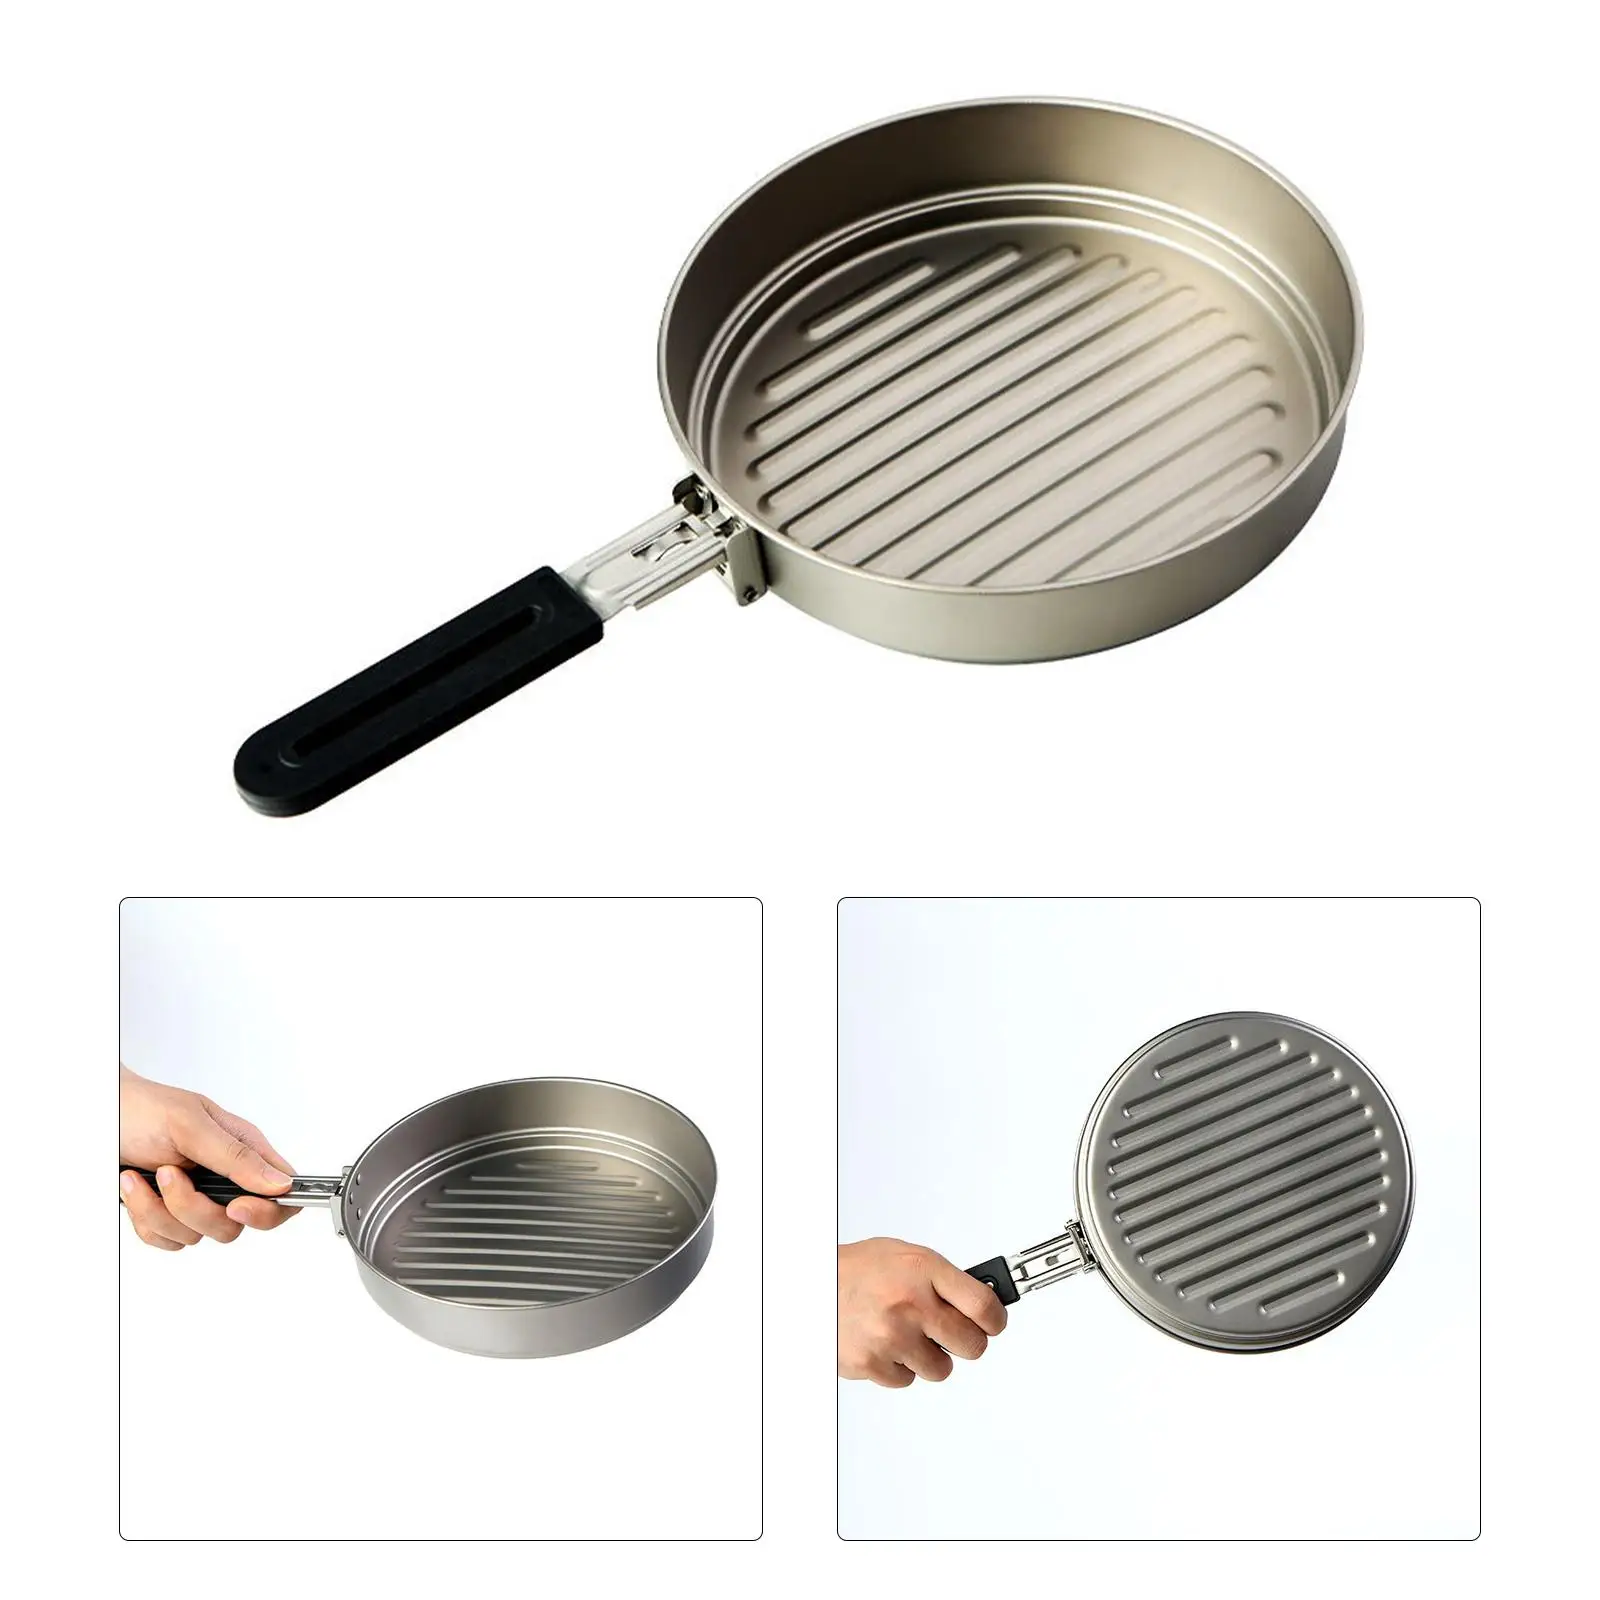 1100ml Titanium Fry Pan Ultralight Grill Frying Pan with Folding Handle for Outdoor Cooking Camping Hiking Backpacking